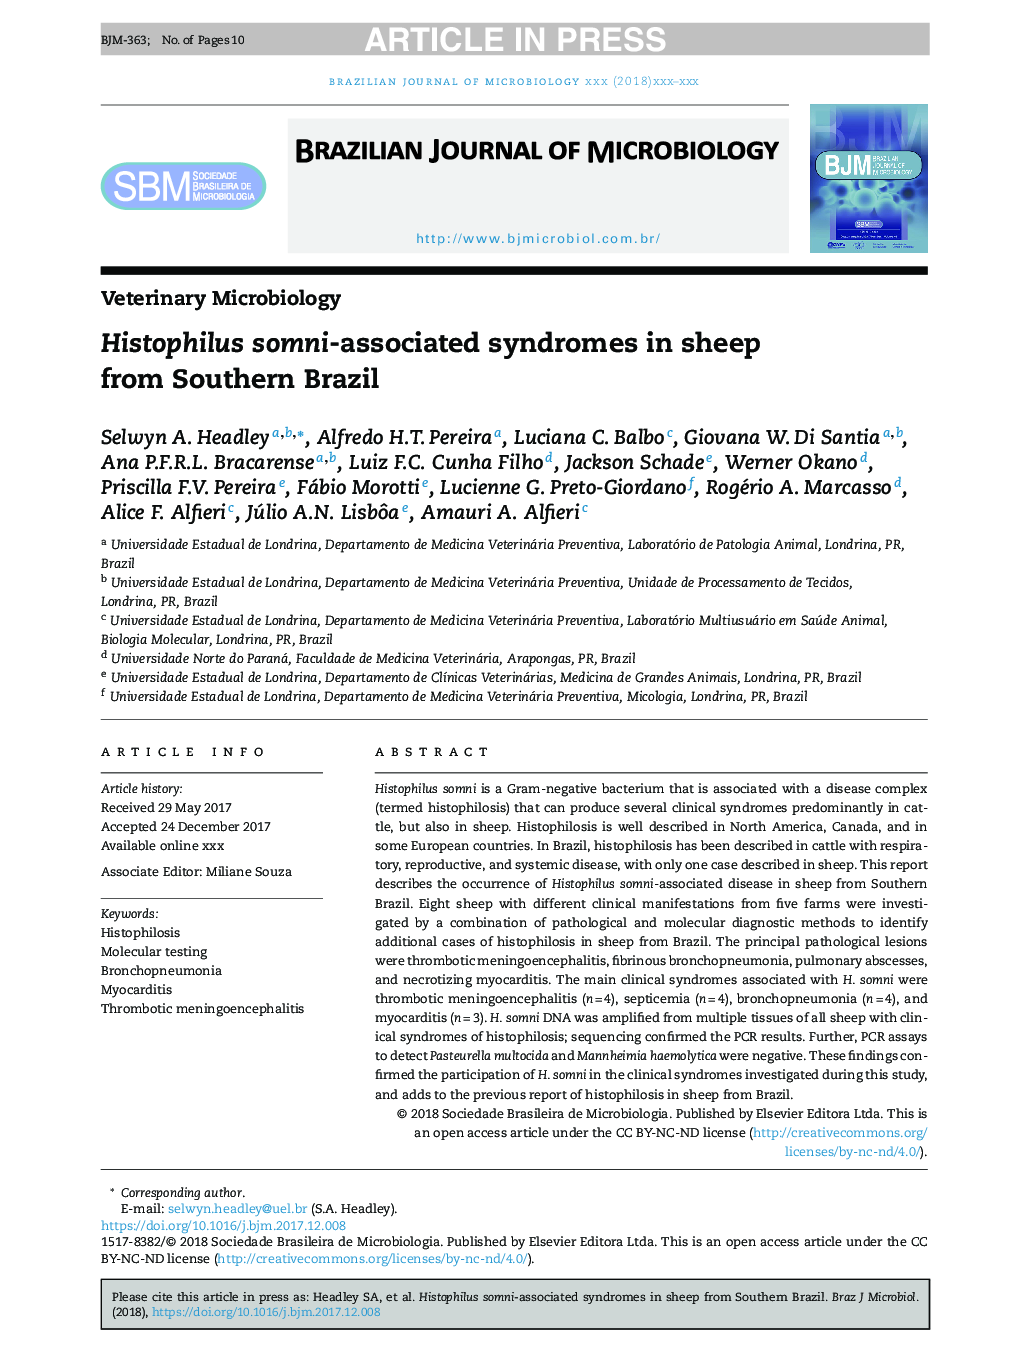 Histophilus somni-associated syndromes in sheep from Southern Brazil